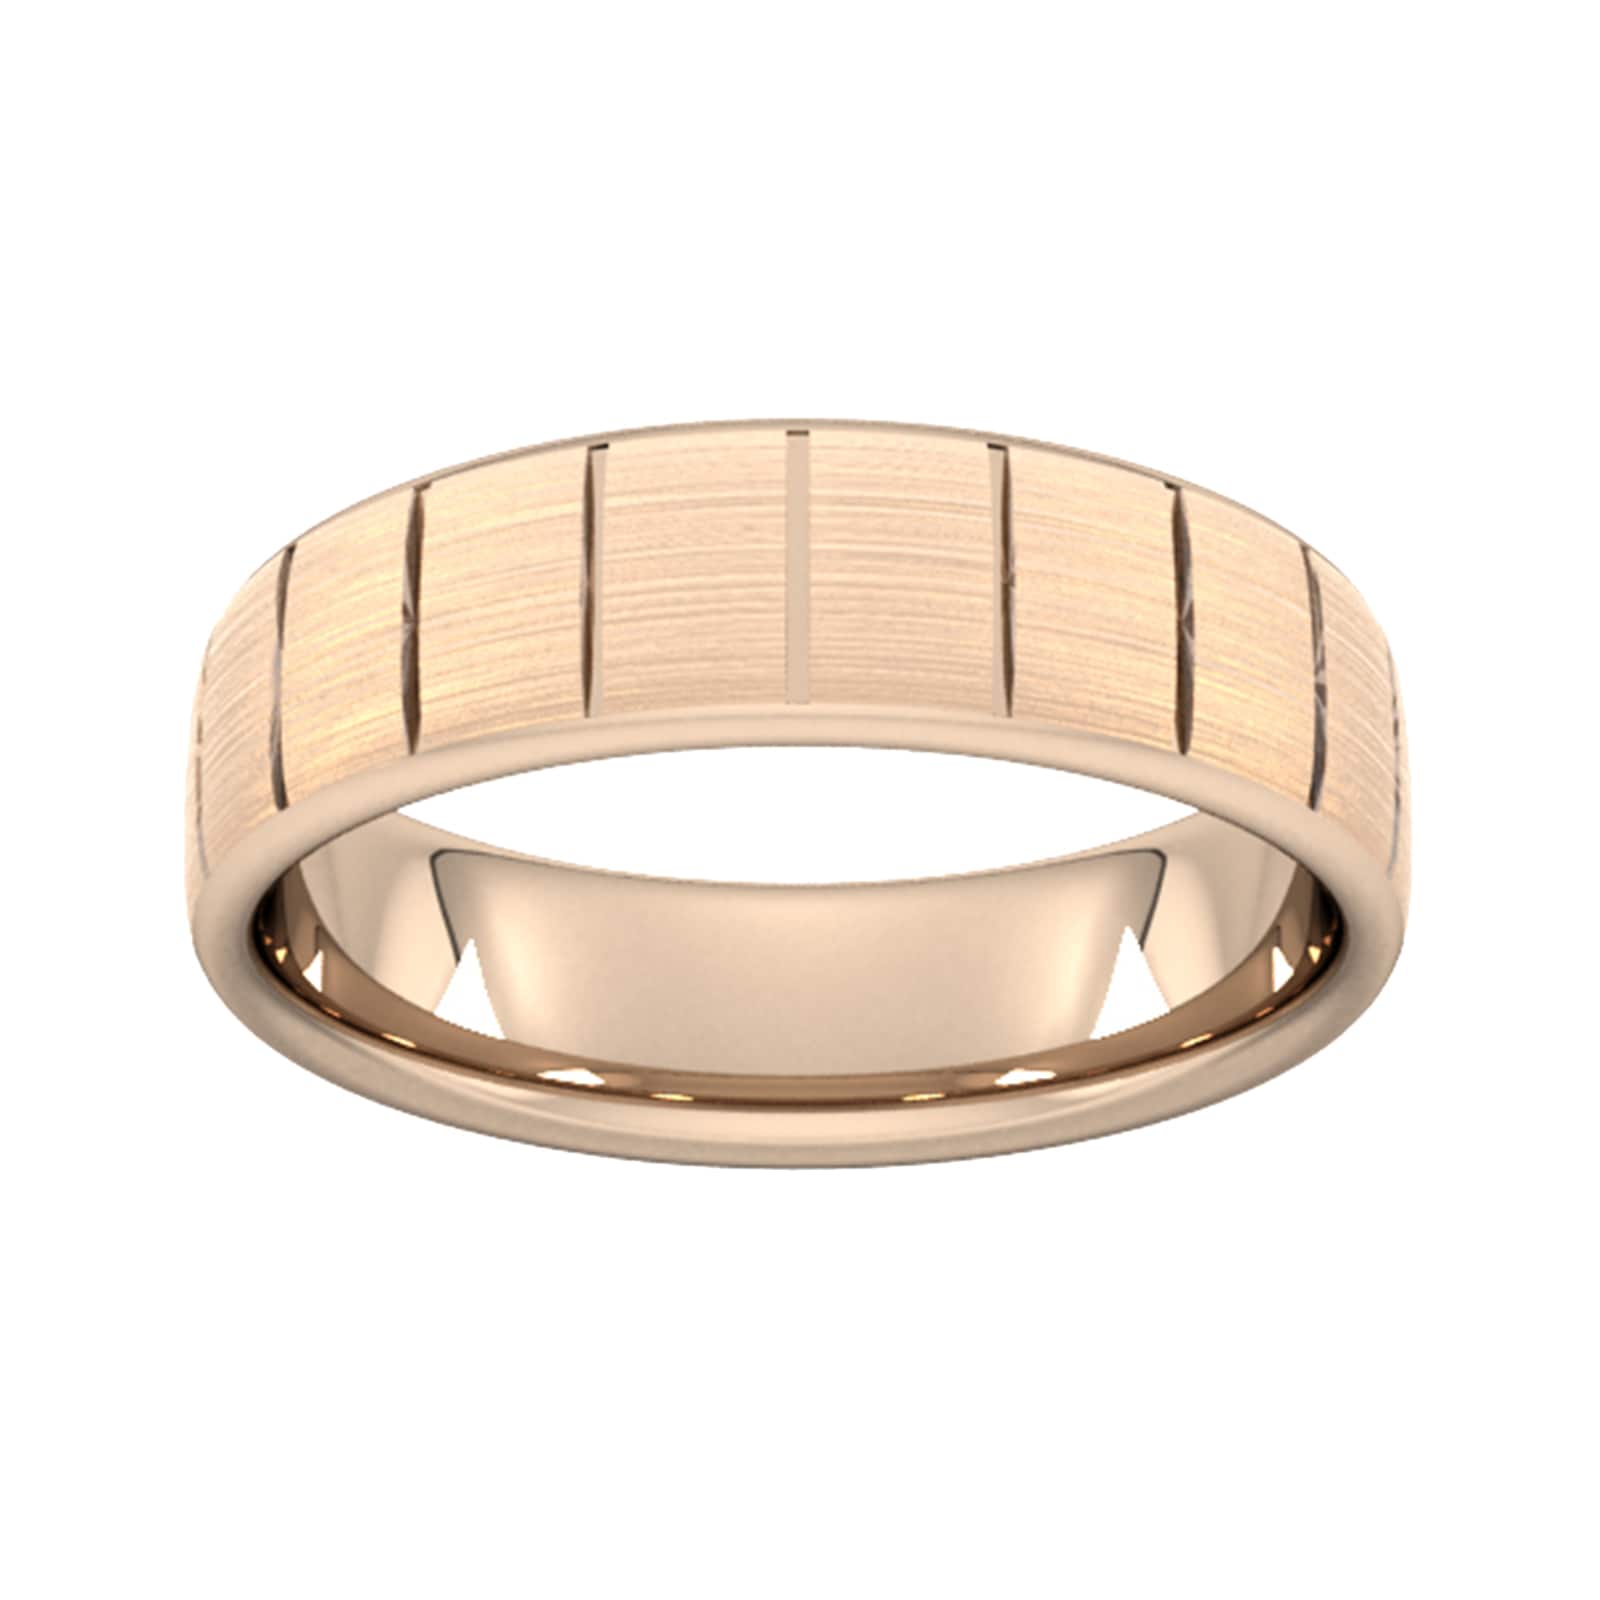 5mm Flat Court Heavy Vertical Lines Wedding Ring In 9 Carat Rose Gold - Ring Size Q